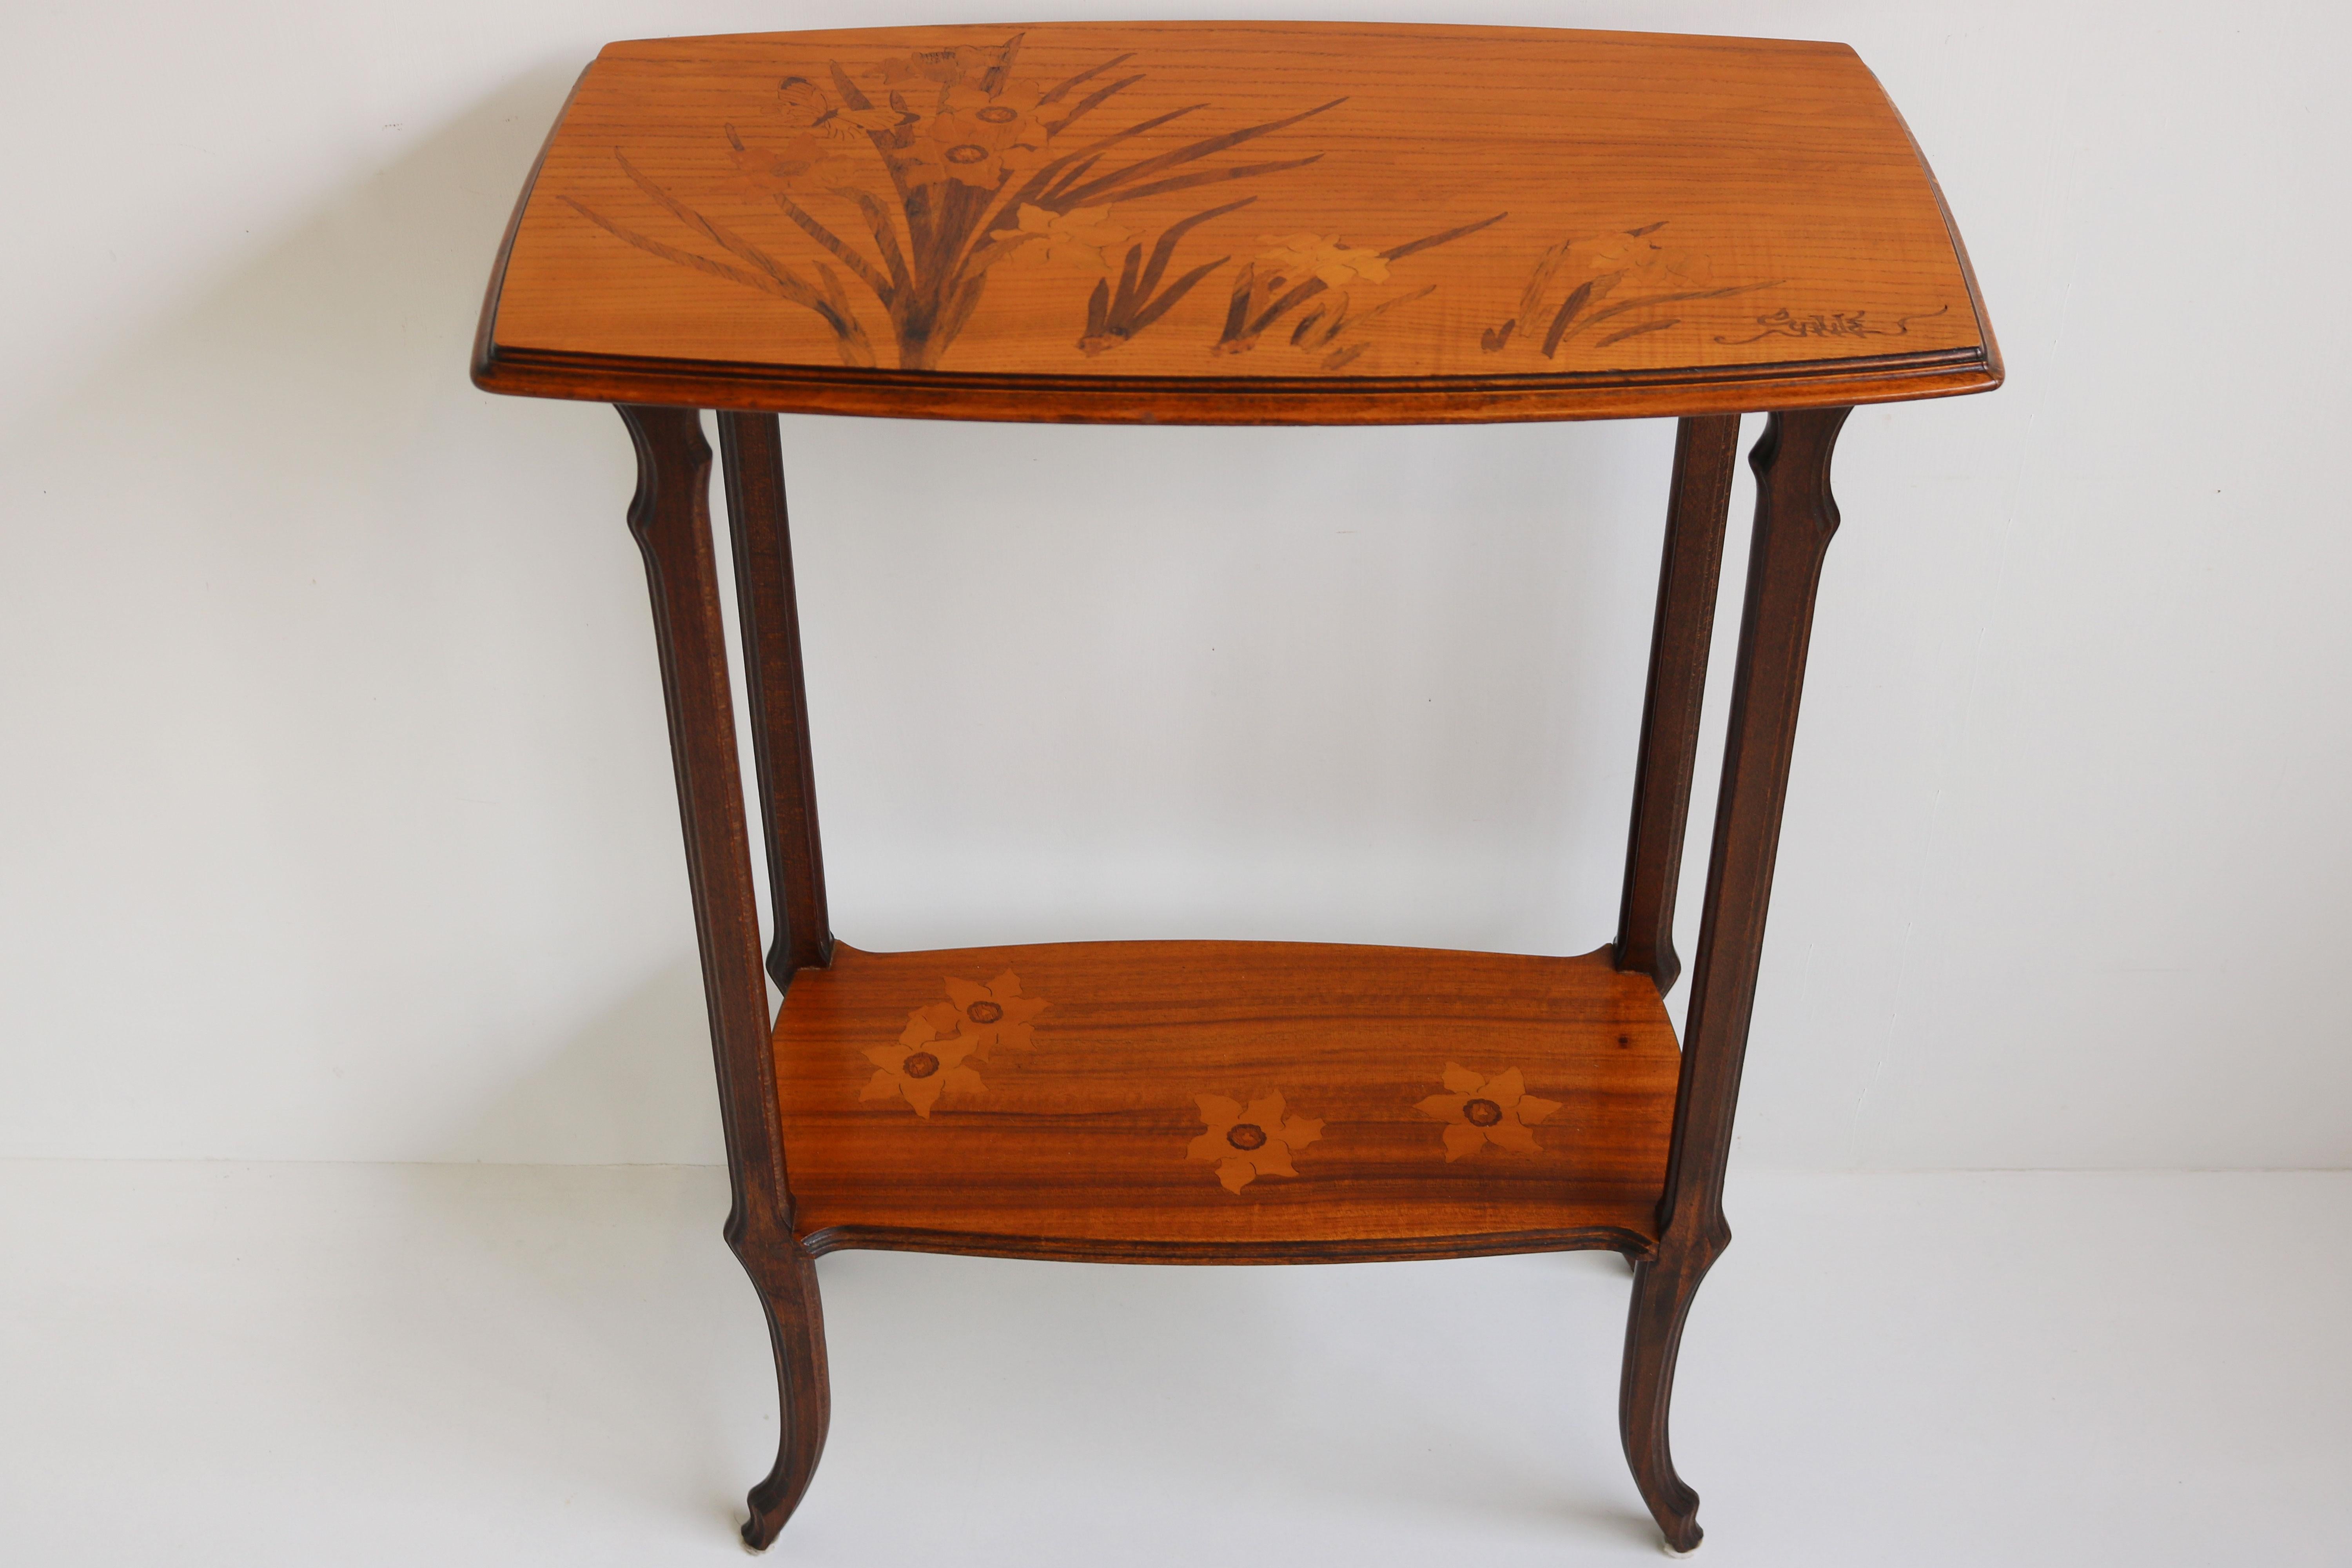 Original Antique French Art Nouveau Side Table by Emile Galle 1900 Inlaid Wood 7